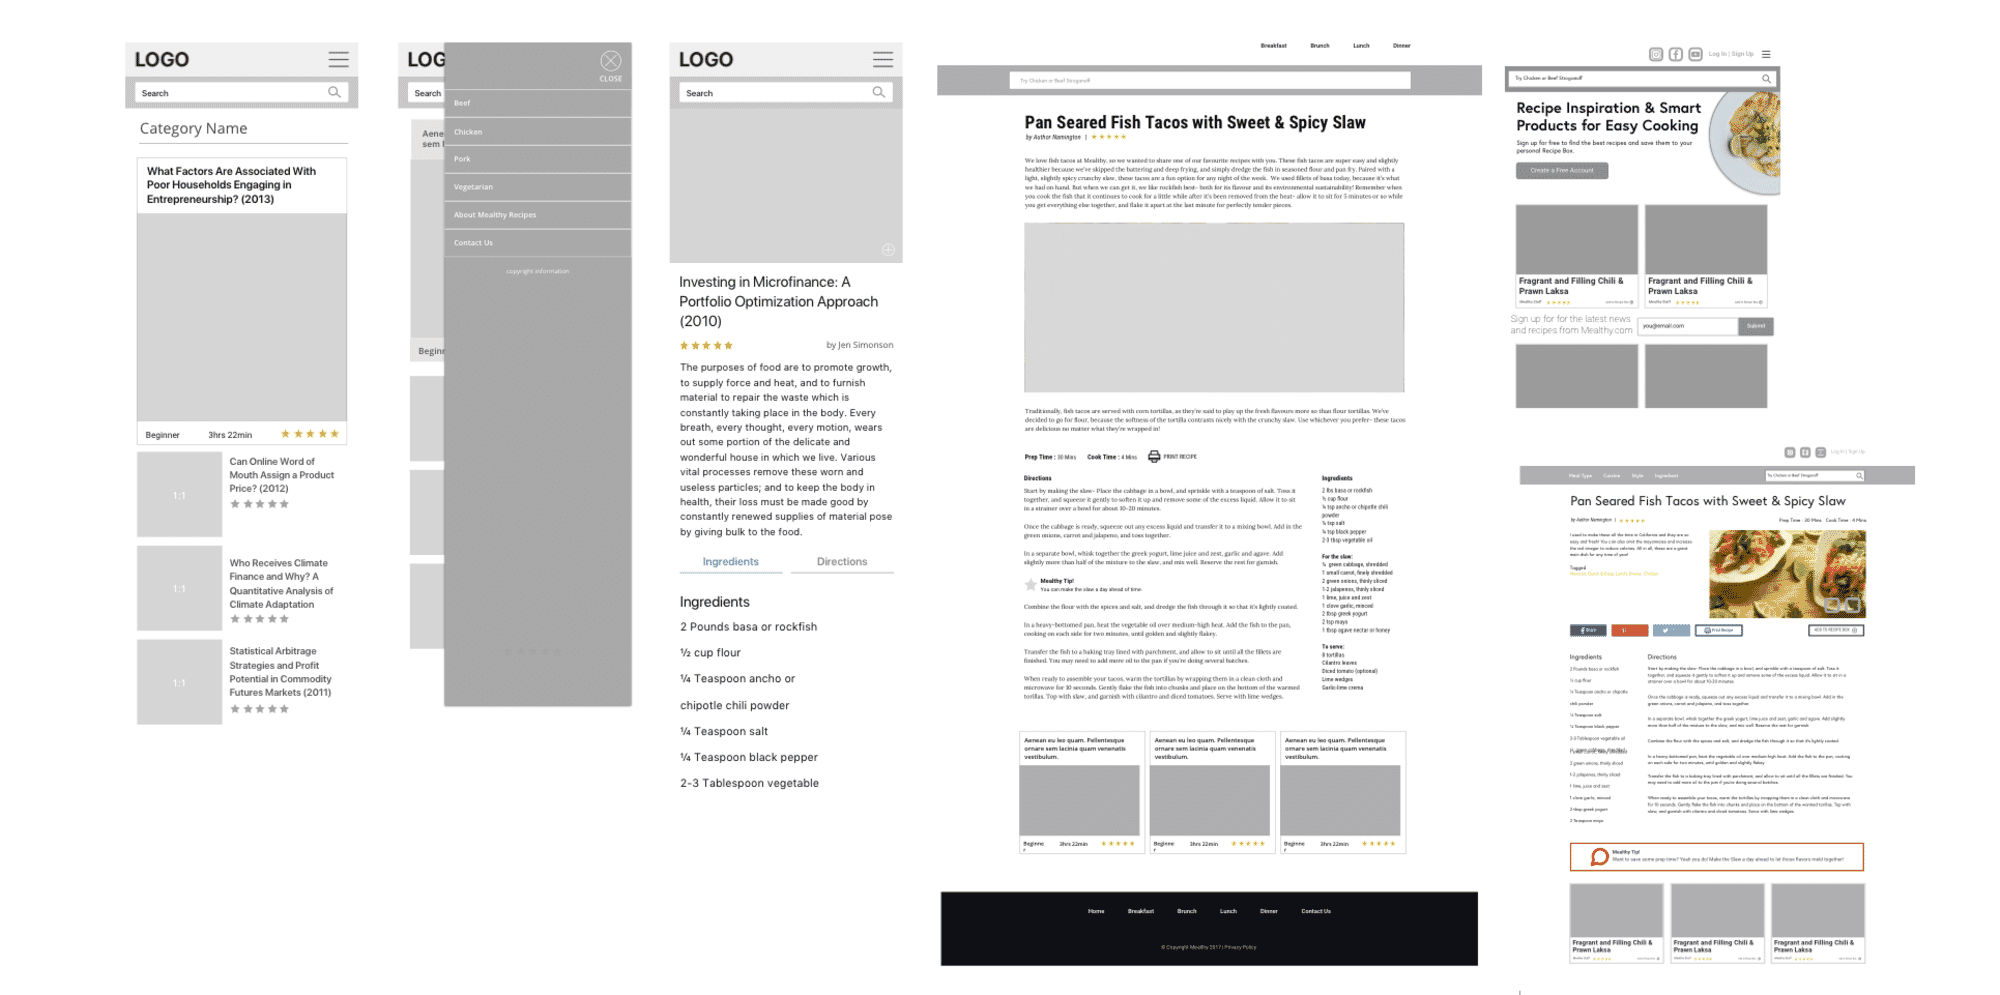 the progression of the recipe page over several months